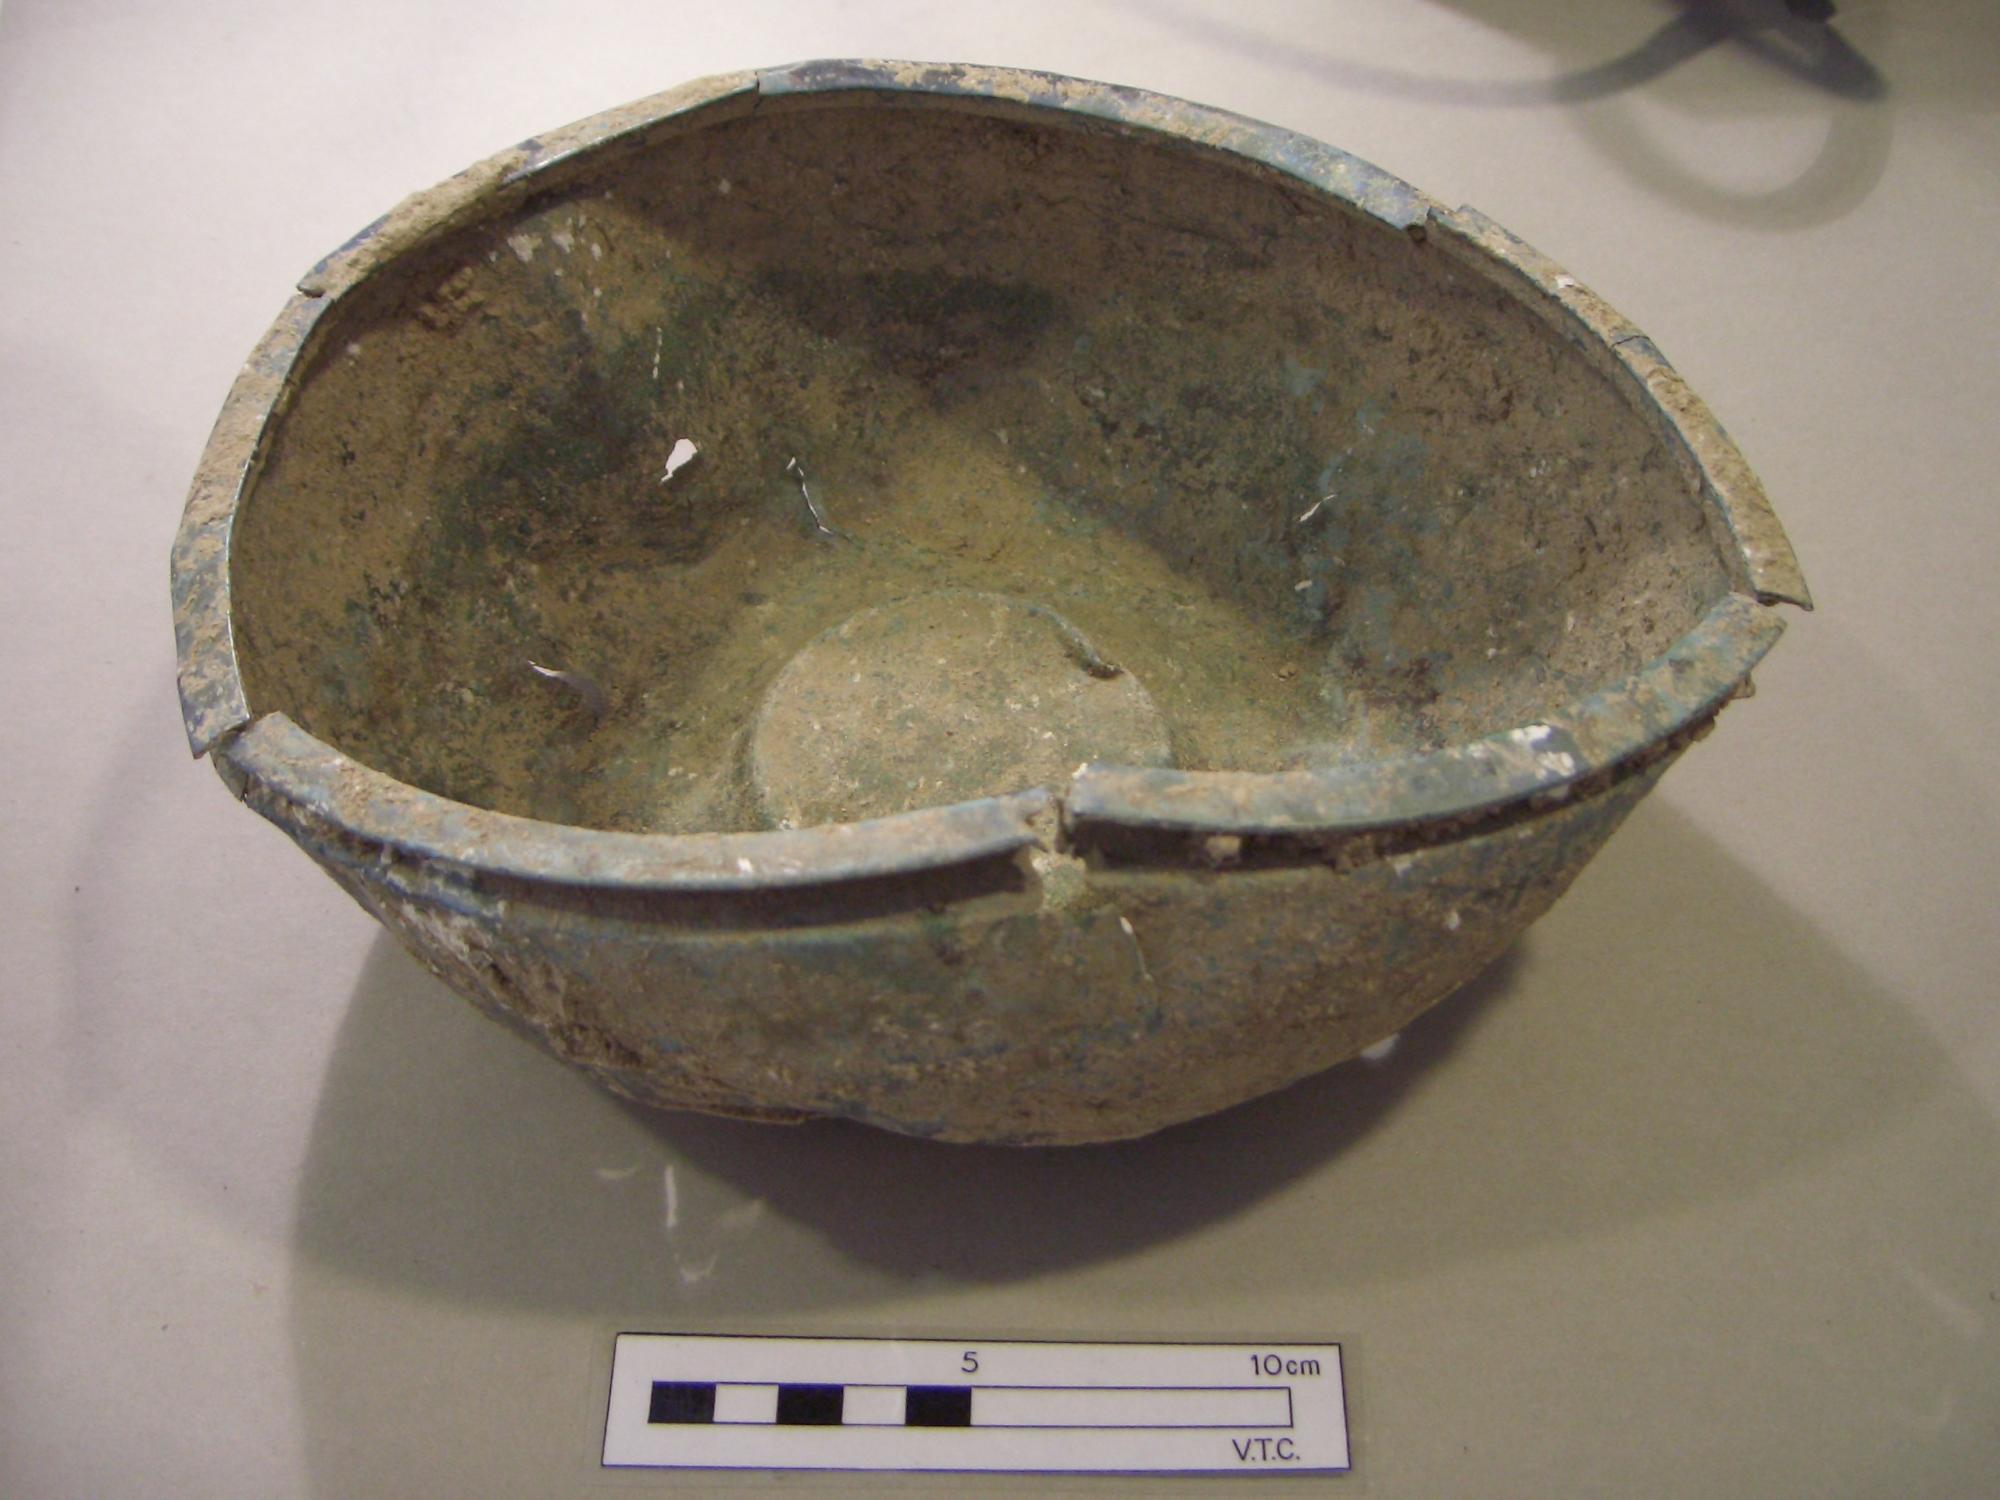 Hanging bowl before conservation